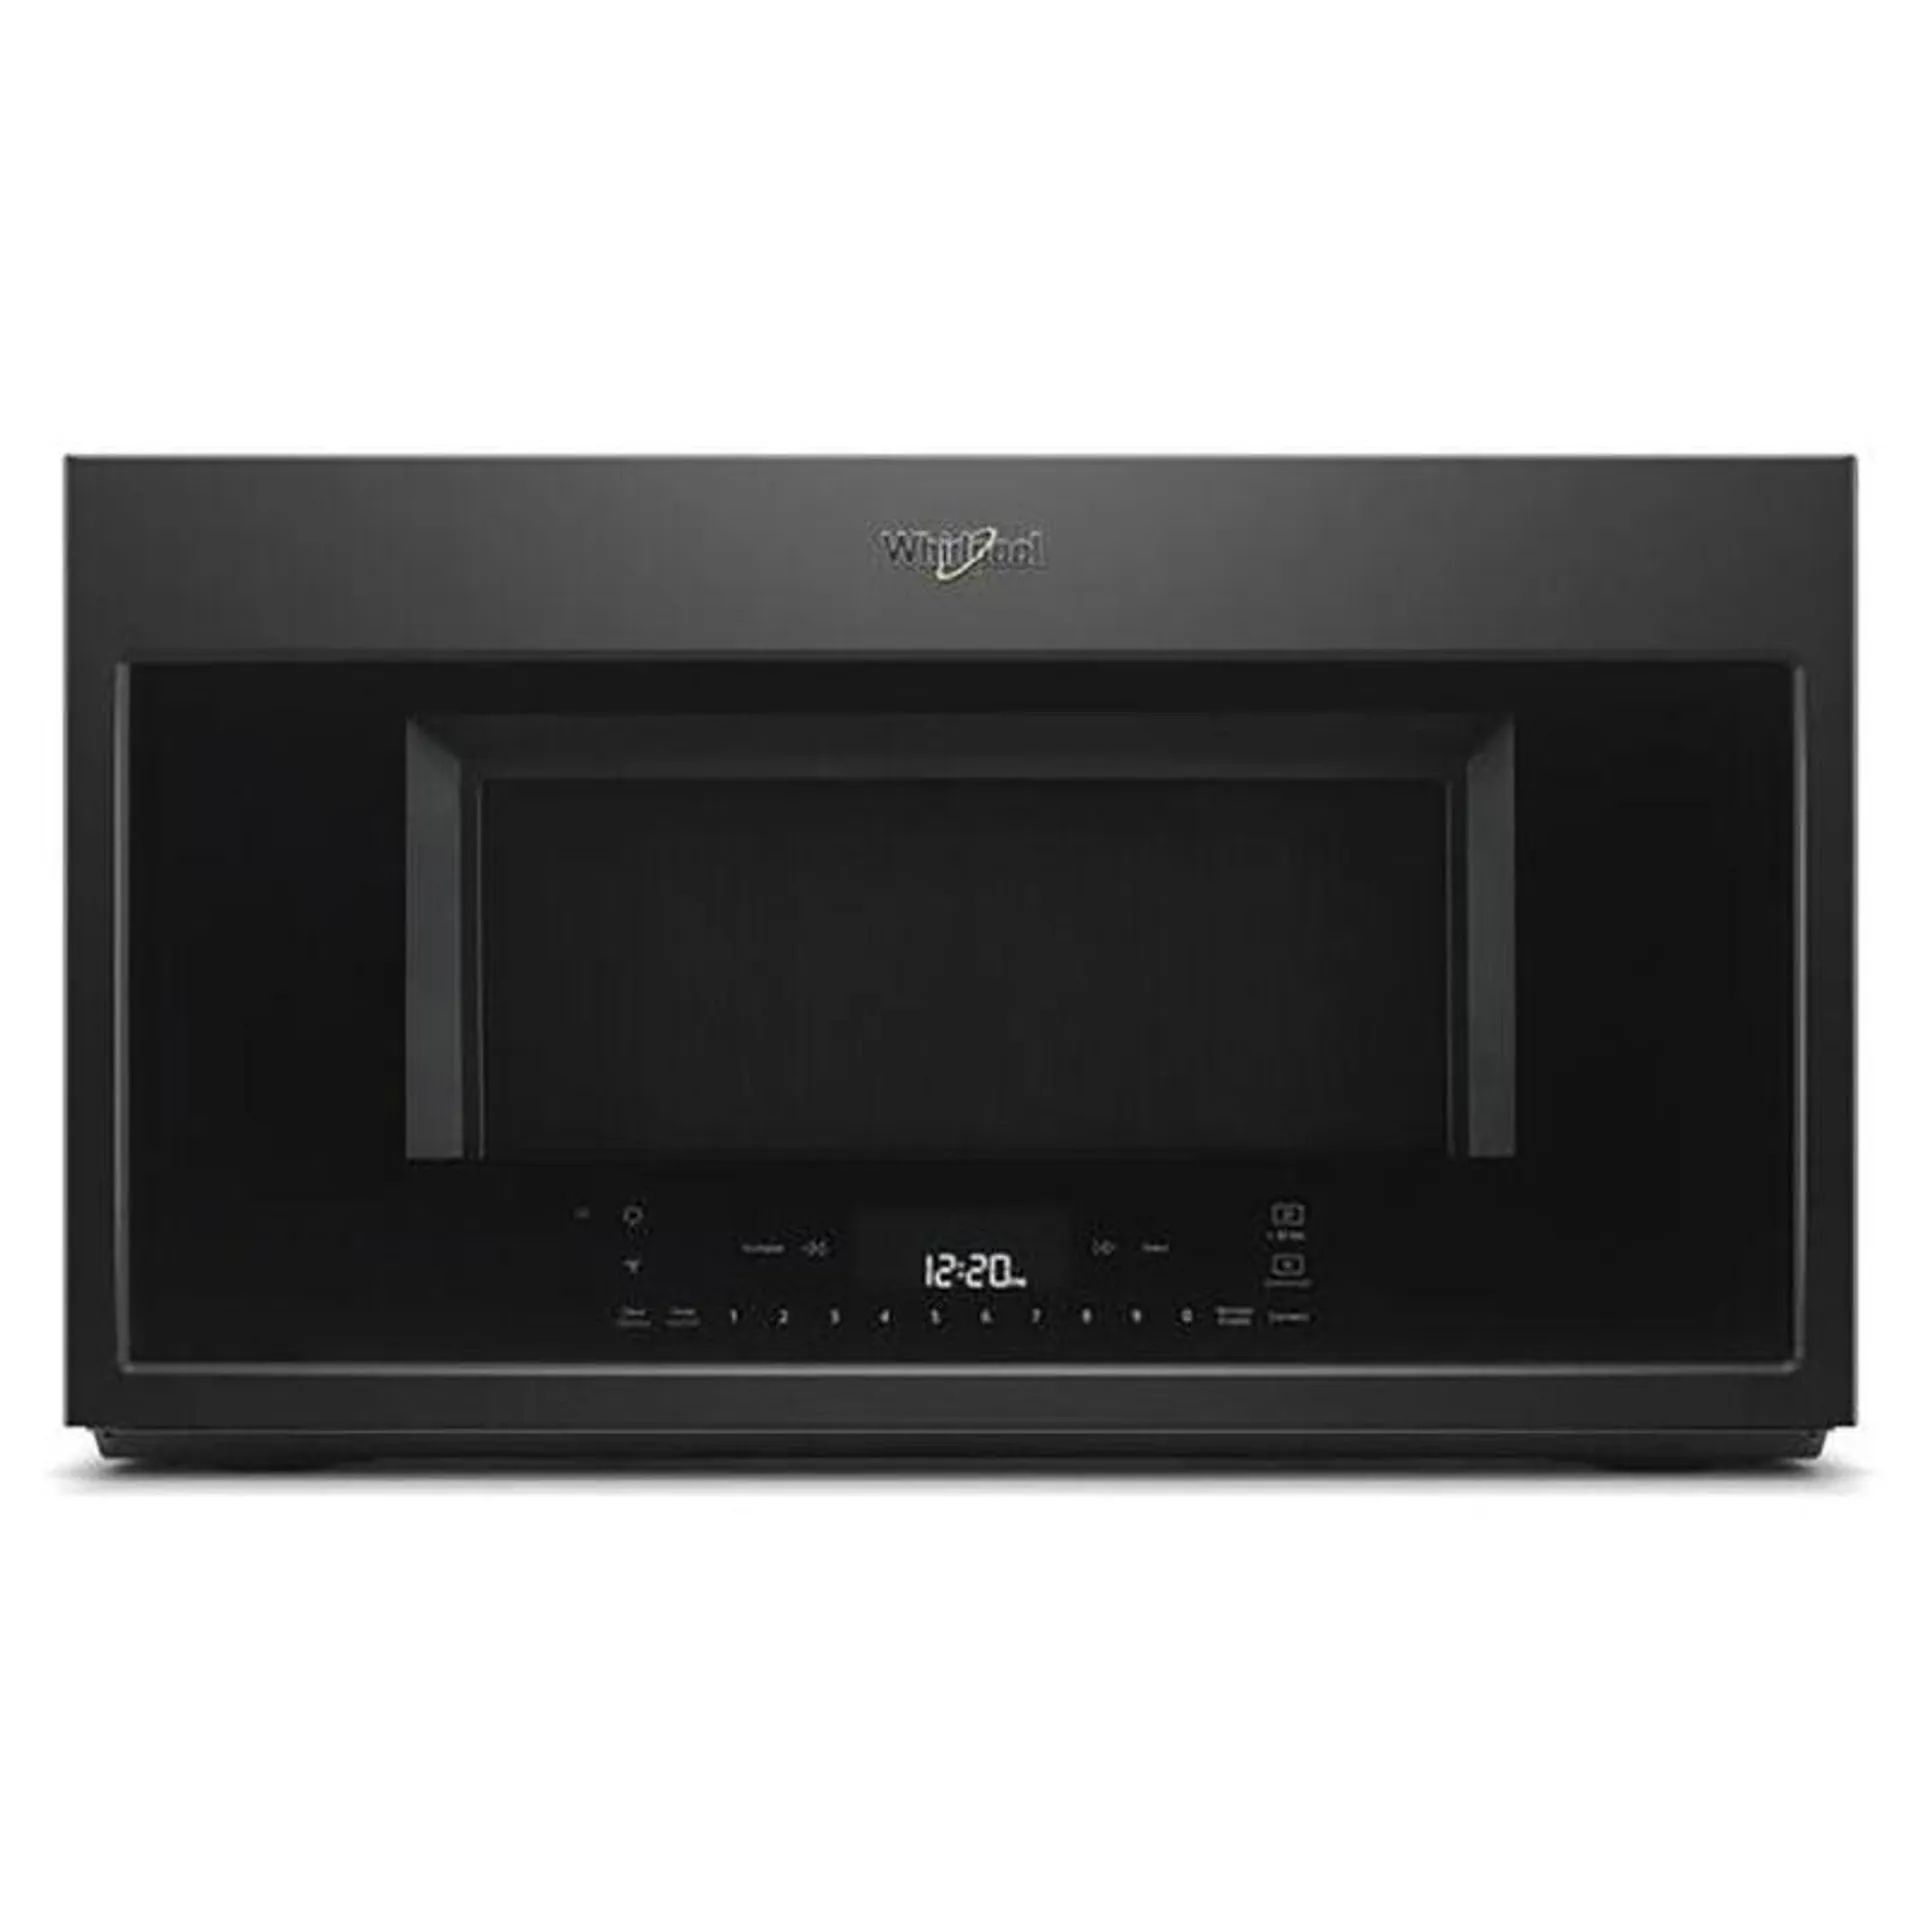 Whirlpool 30" 1.9 Cu. Ft. Over-the-Range Microwave with 10 Power Levels, 400 CFM & Sensor Cooking Controls - Black